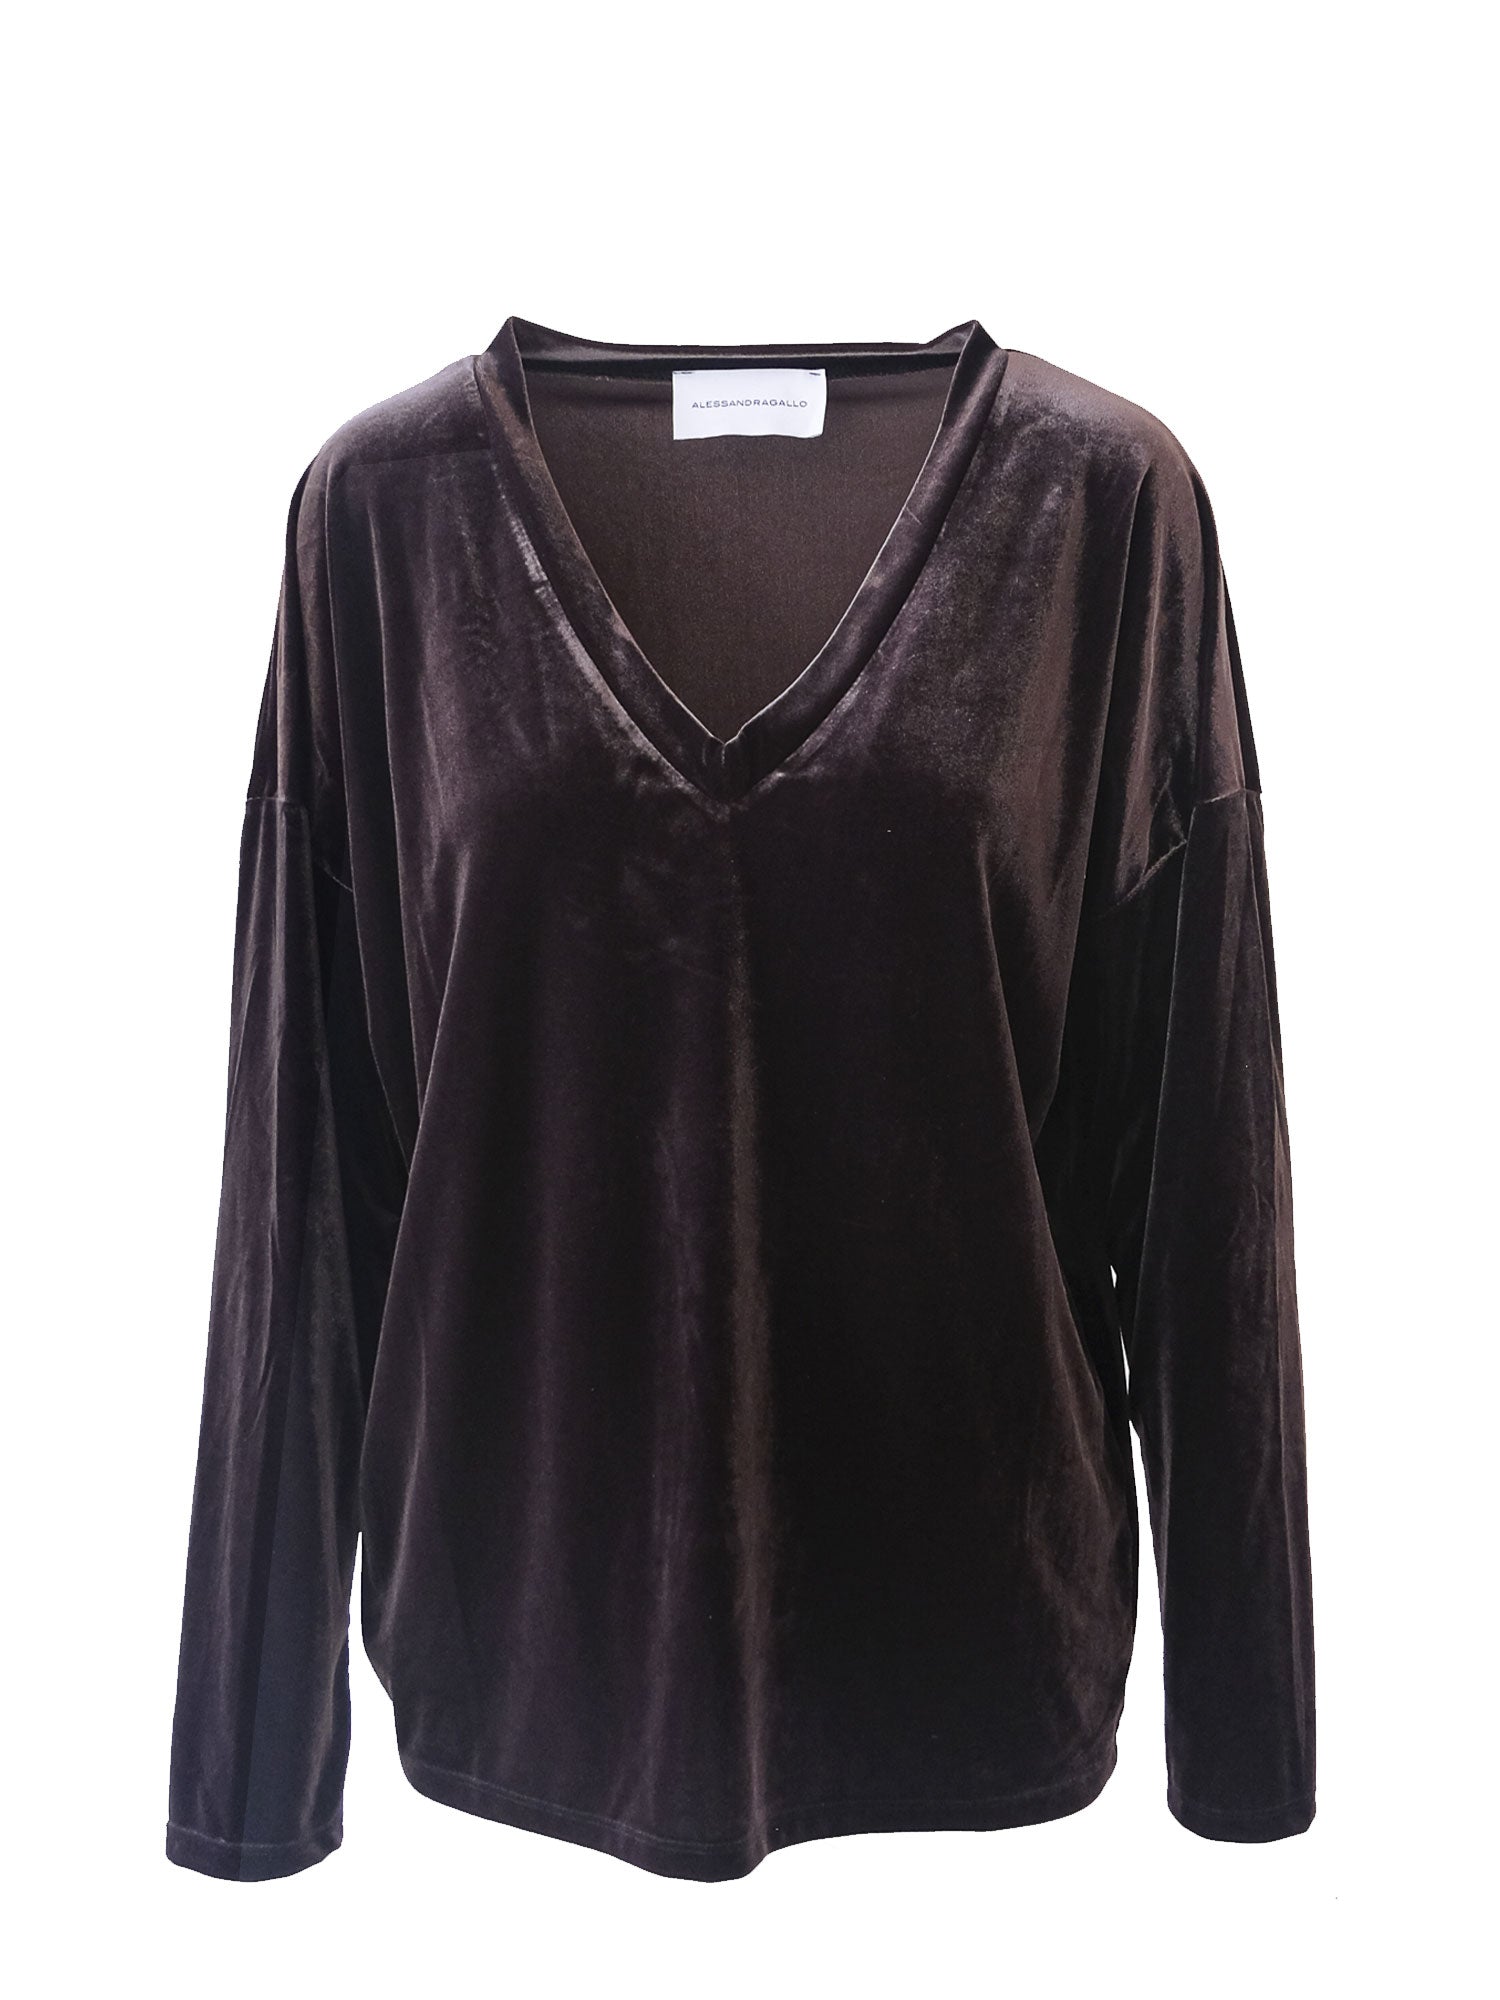 EVA - sweatshirt over with V neck in brown chenille